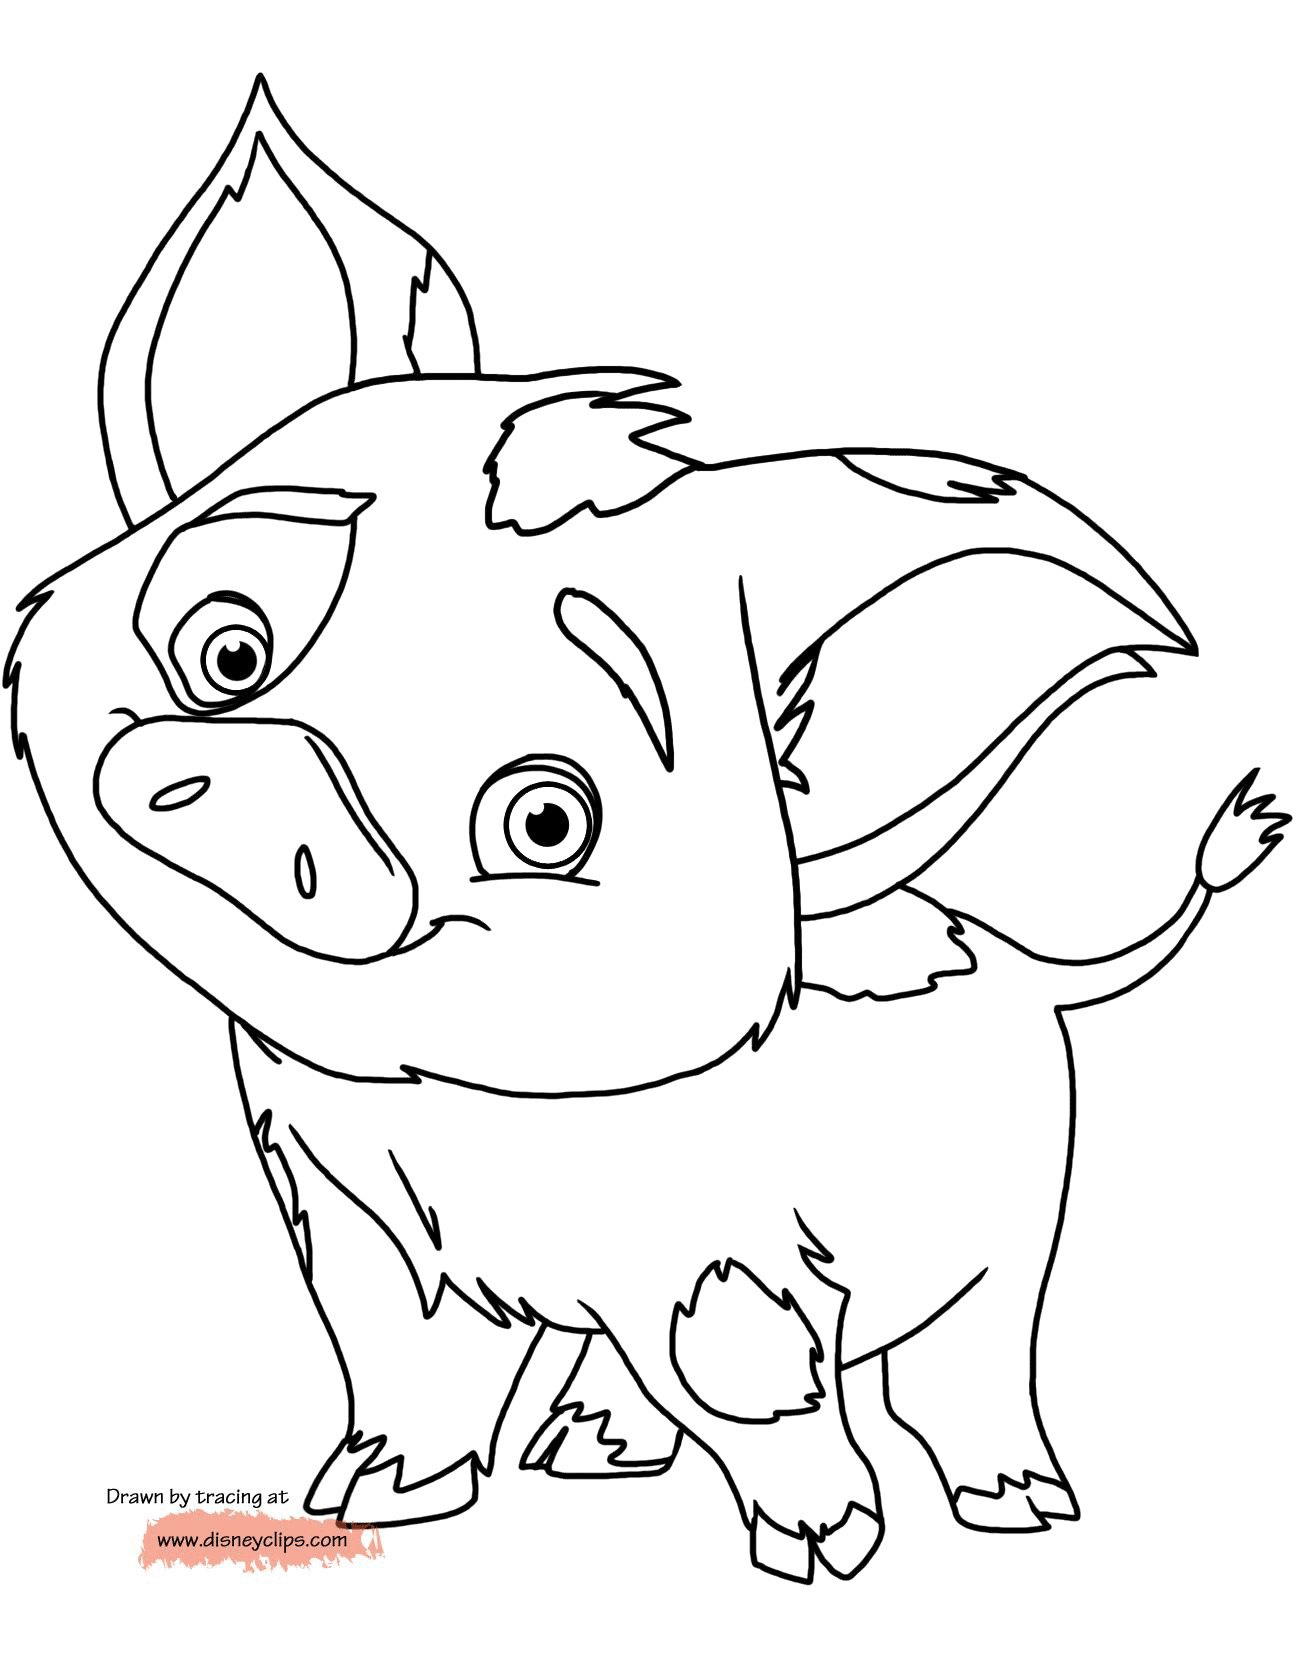 Coloring Pages For Kids Moana
 Disney s Moana Coloring Pages